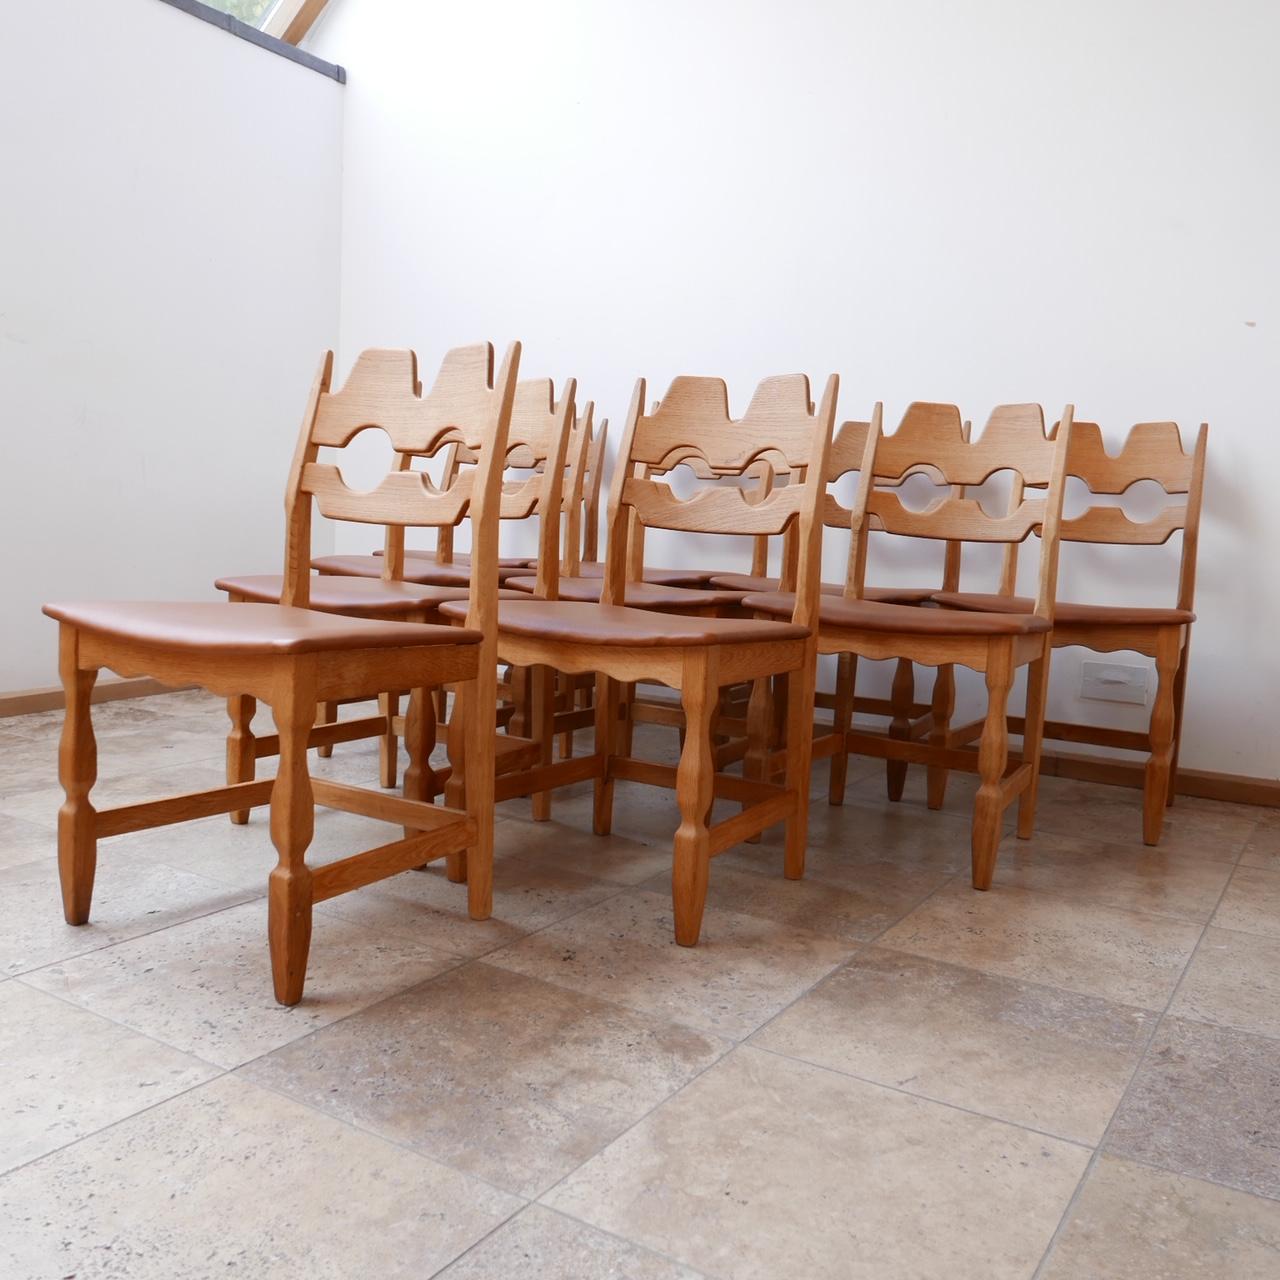 A run of dining chairs by Henning Kjærnulf.

Oak and tan leather. 

Razor blade style back. 

Denmark, c1960s, for EG Møbler.

Priced and sold individually.

Dimensions: 50 W x 45 D x 44 seat height x 84 total height in cm.

Delivery: